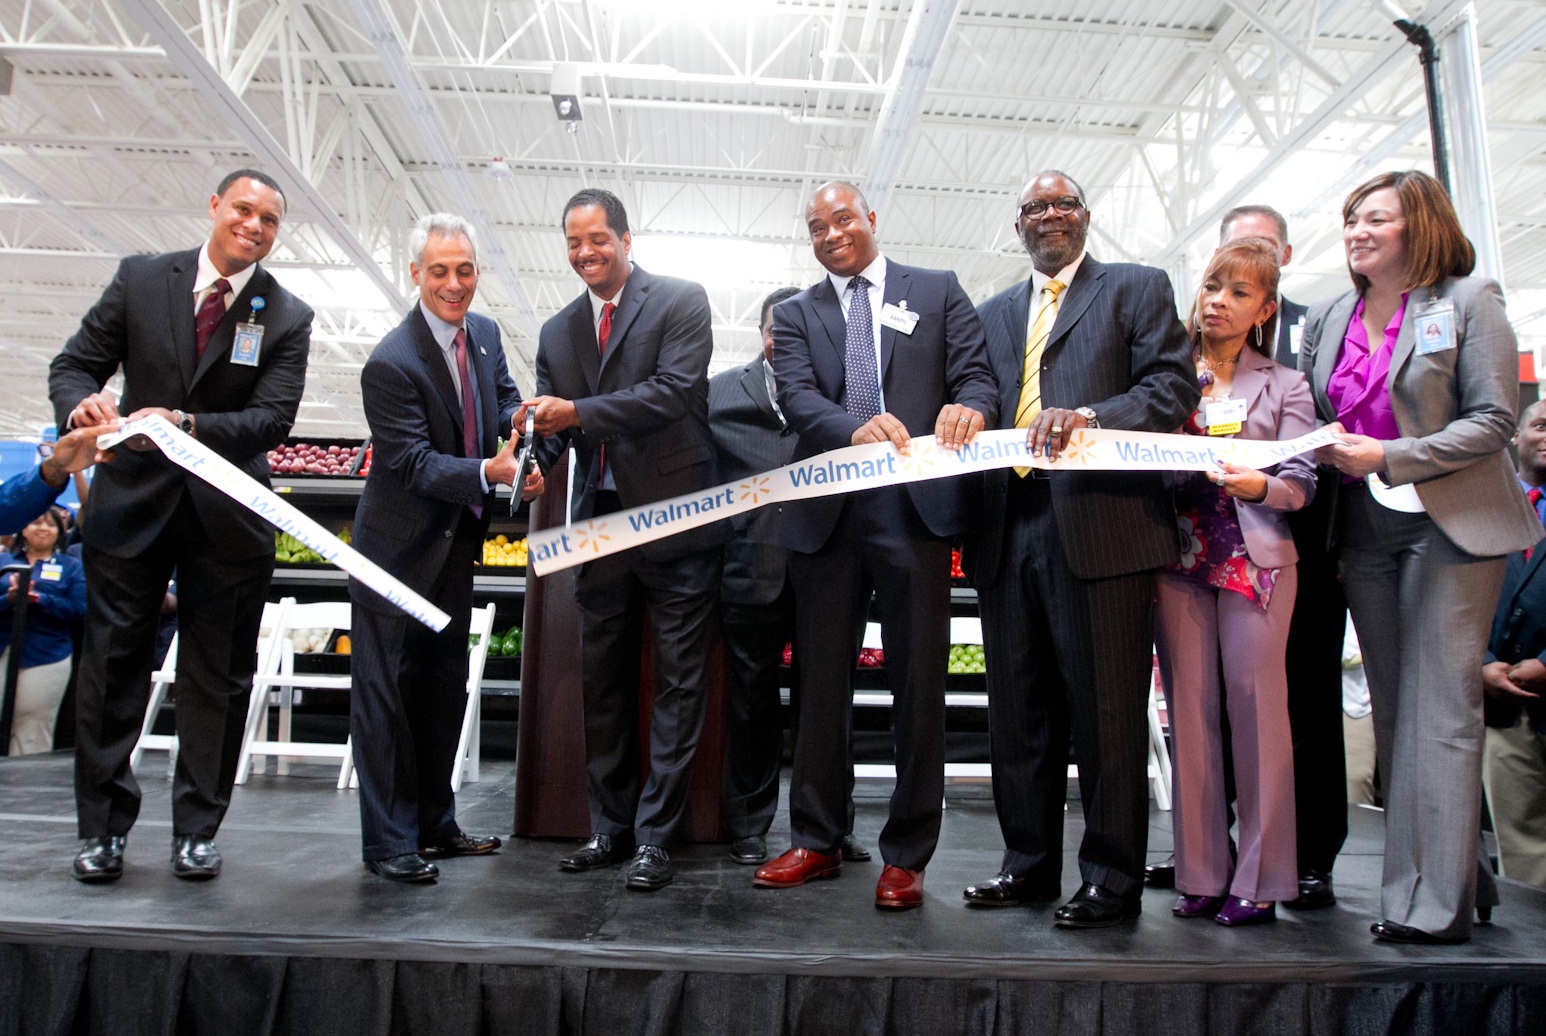 Mayor Emanuel joins Alderman Beale and community members at the grand opening of a new Walmart Supercenter in the Pullman neighborhood.